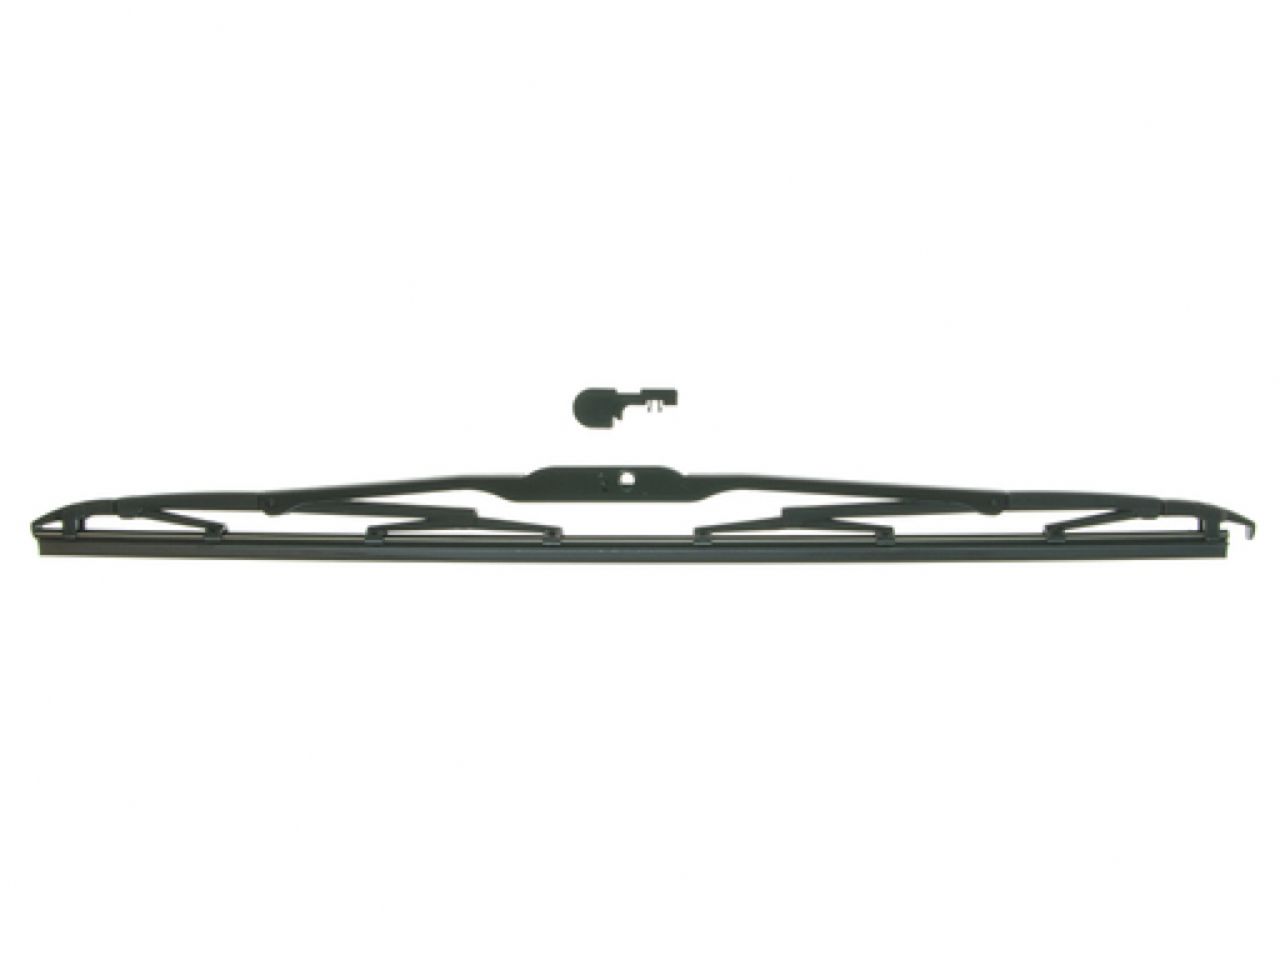 Anco Windshield Wipers 31-20 Item Image